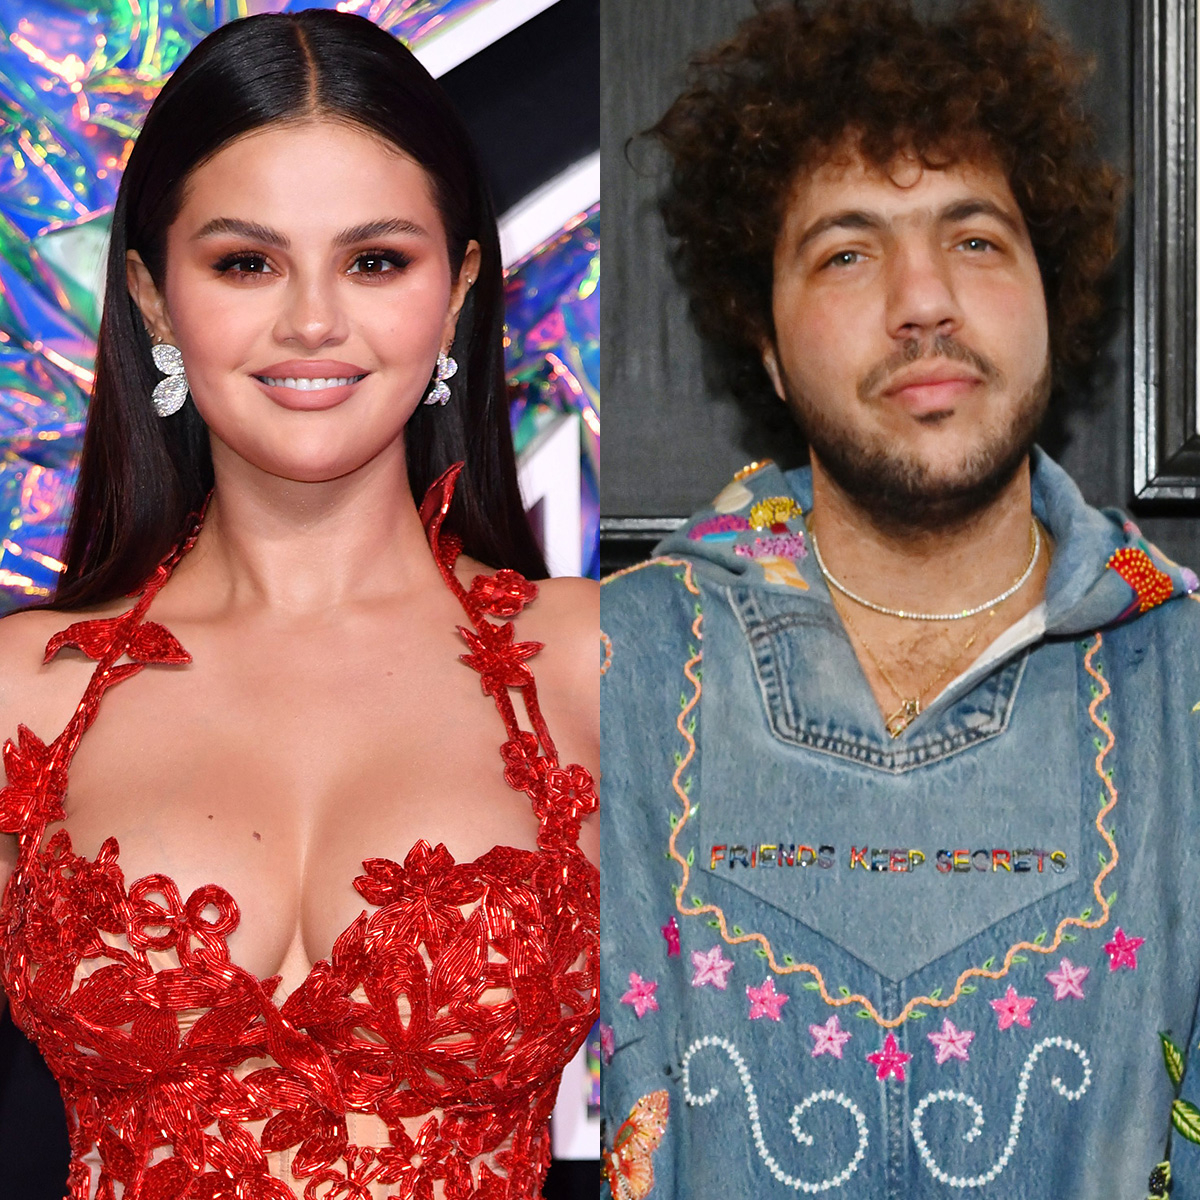 Come & Get a Look at Selena Gomez’s Pics of Her Date With Benny Blanco